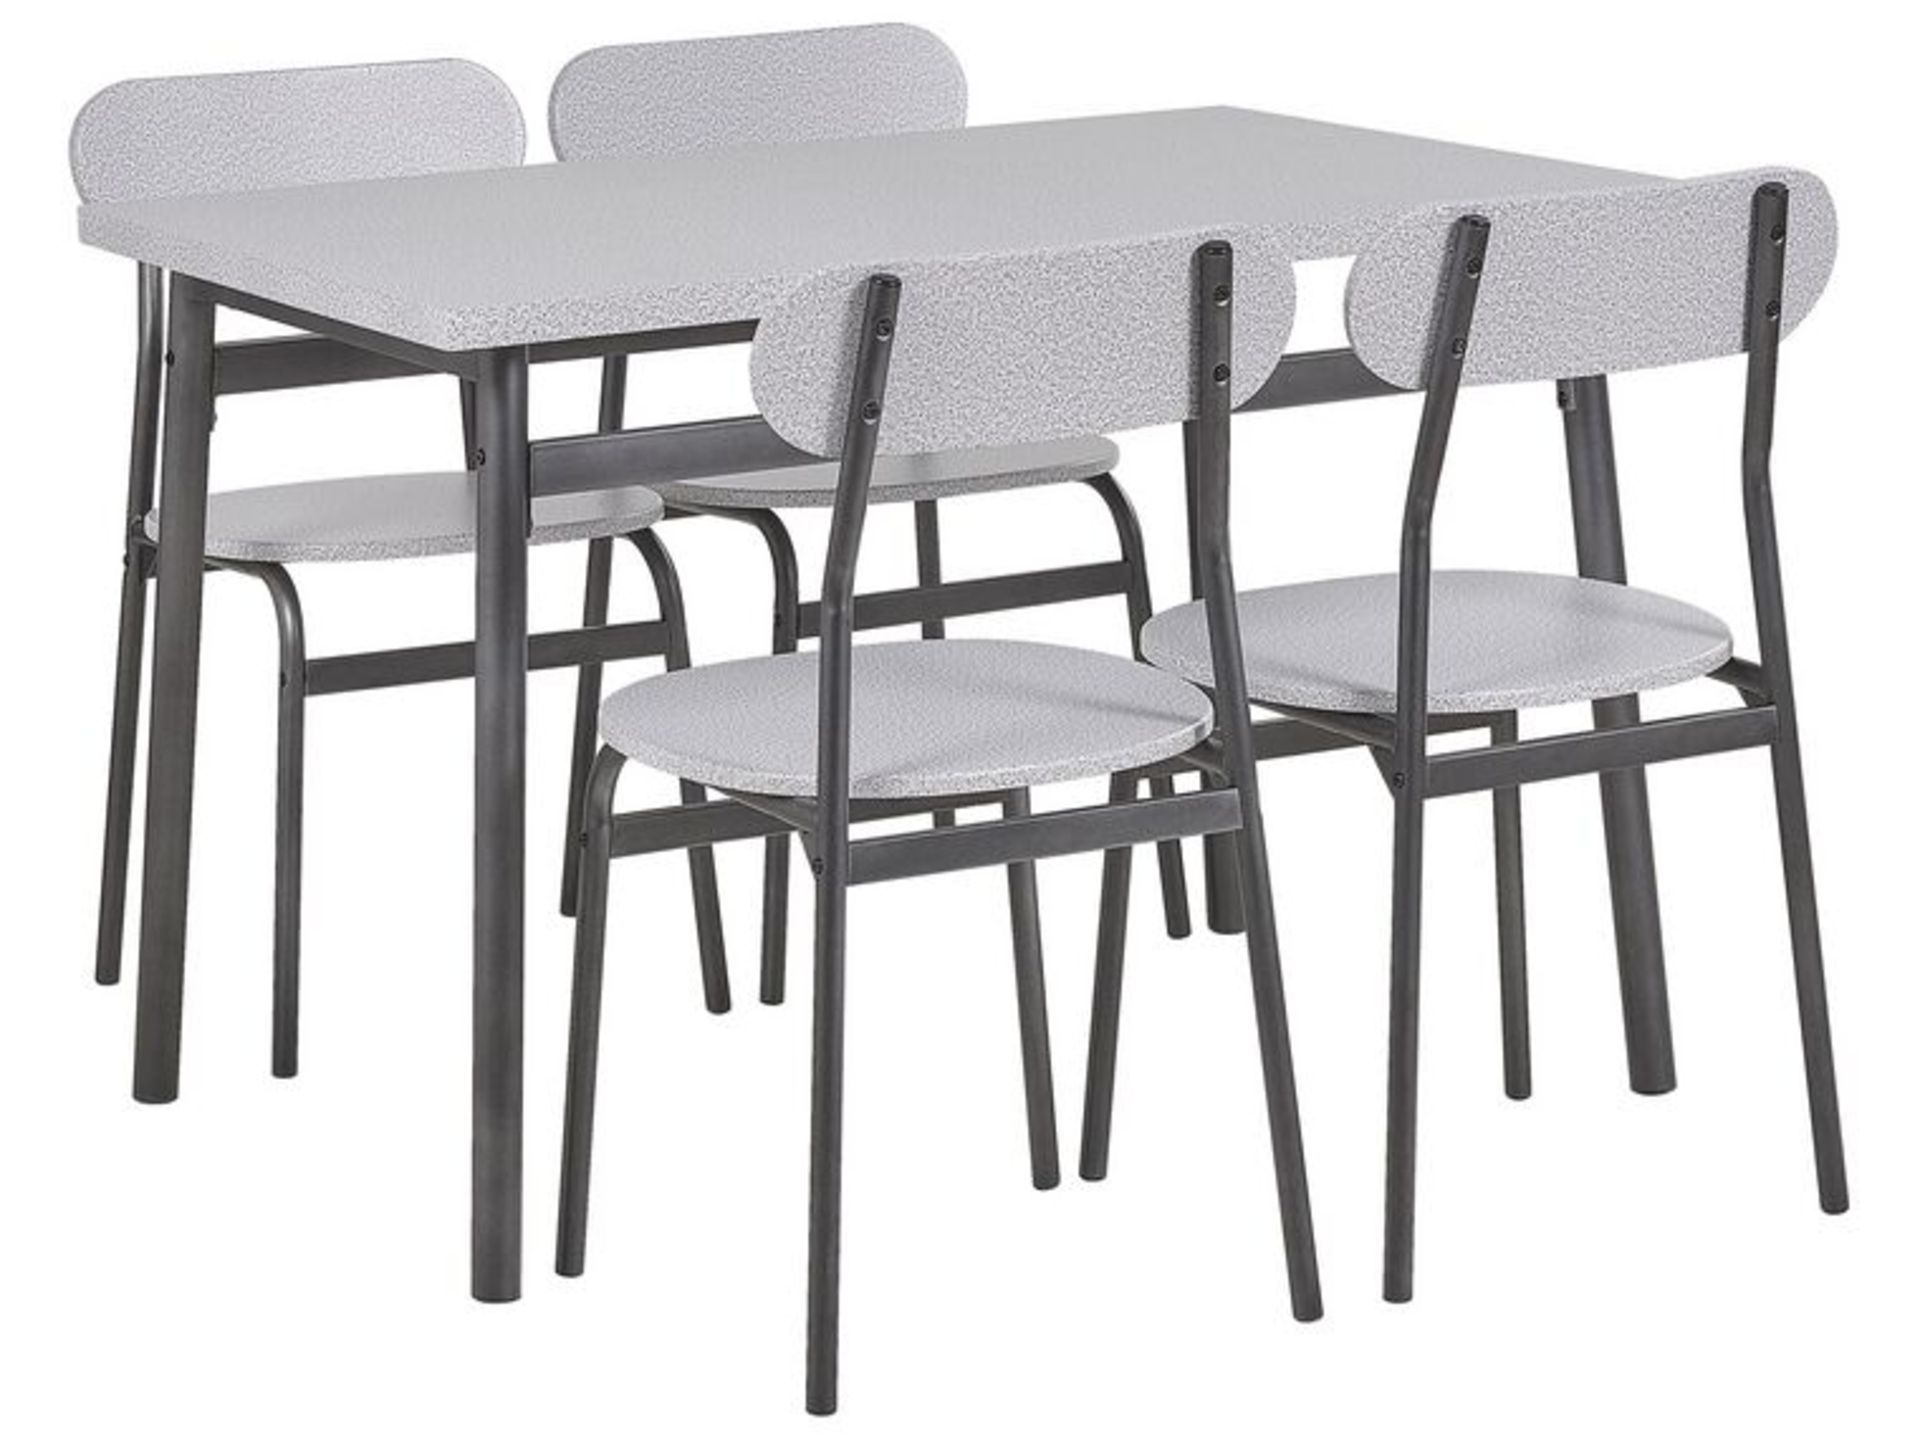 Velden 4 Seater Dining Set Grey with Black. -ER. A dining furniture group perfect for minimalists